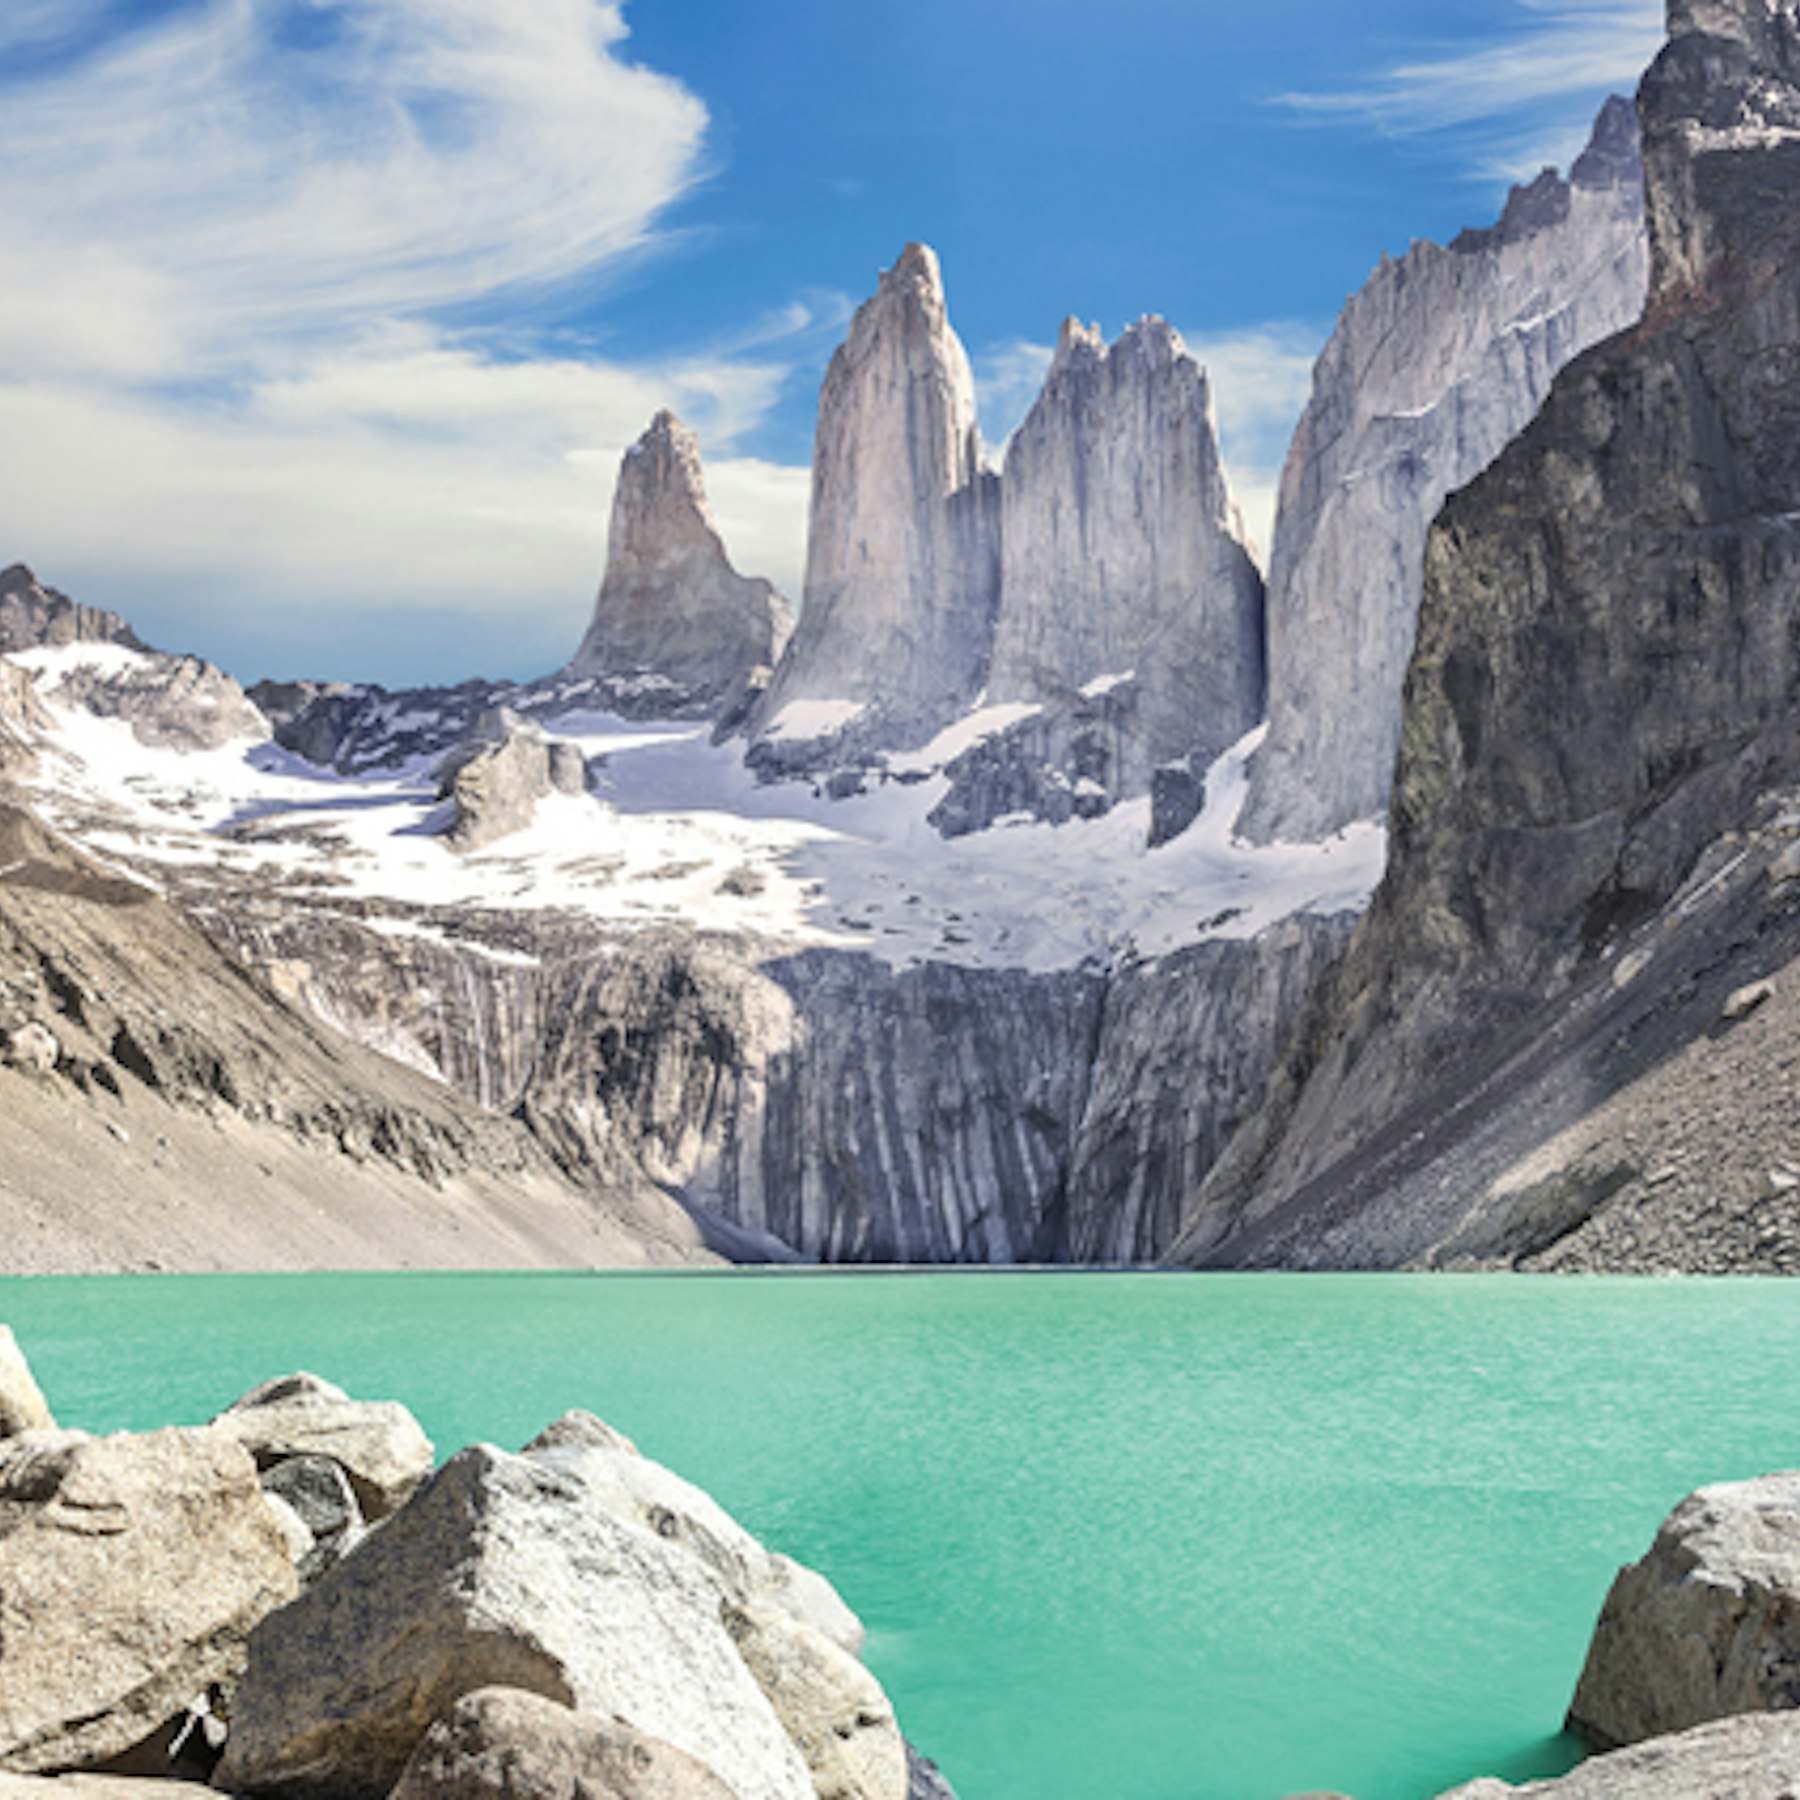 The Torres del Paine mountains in Patagonia, Chile